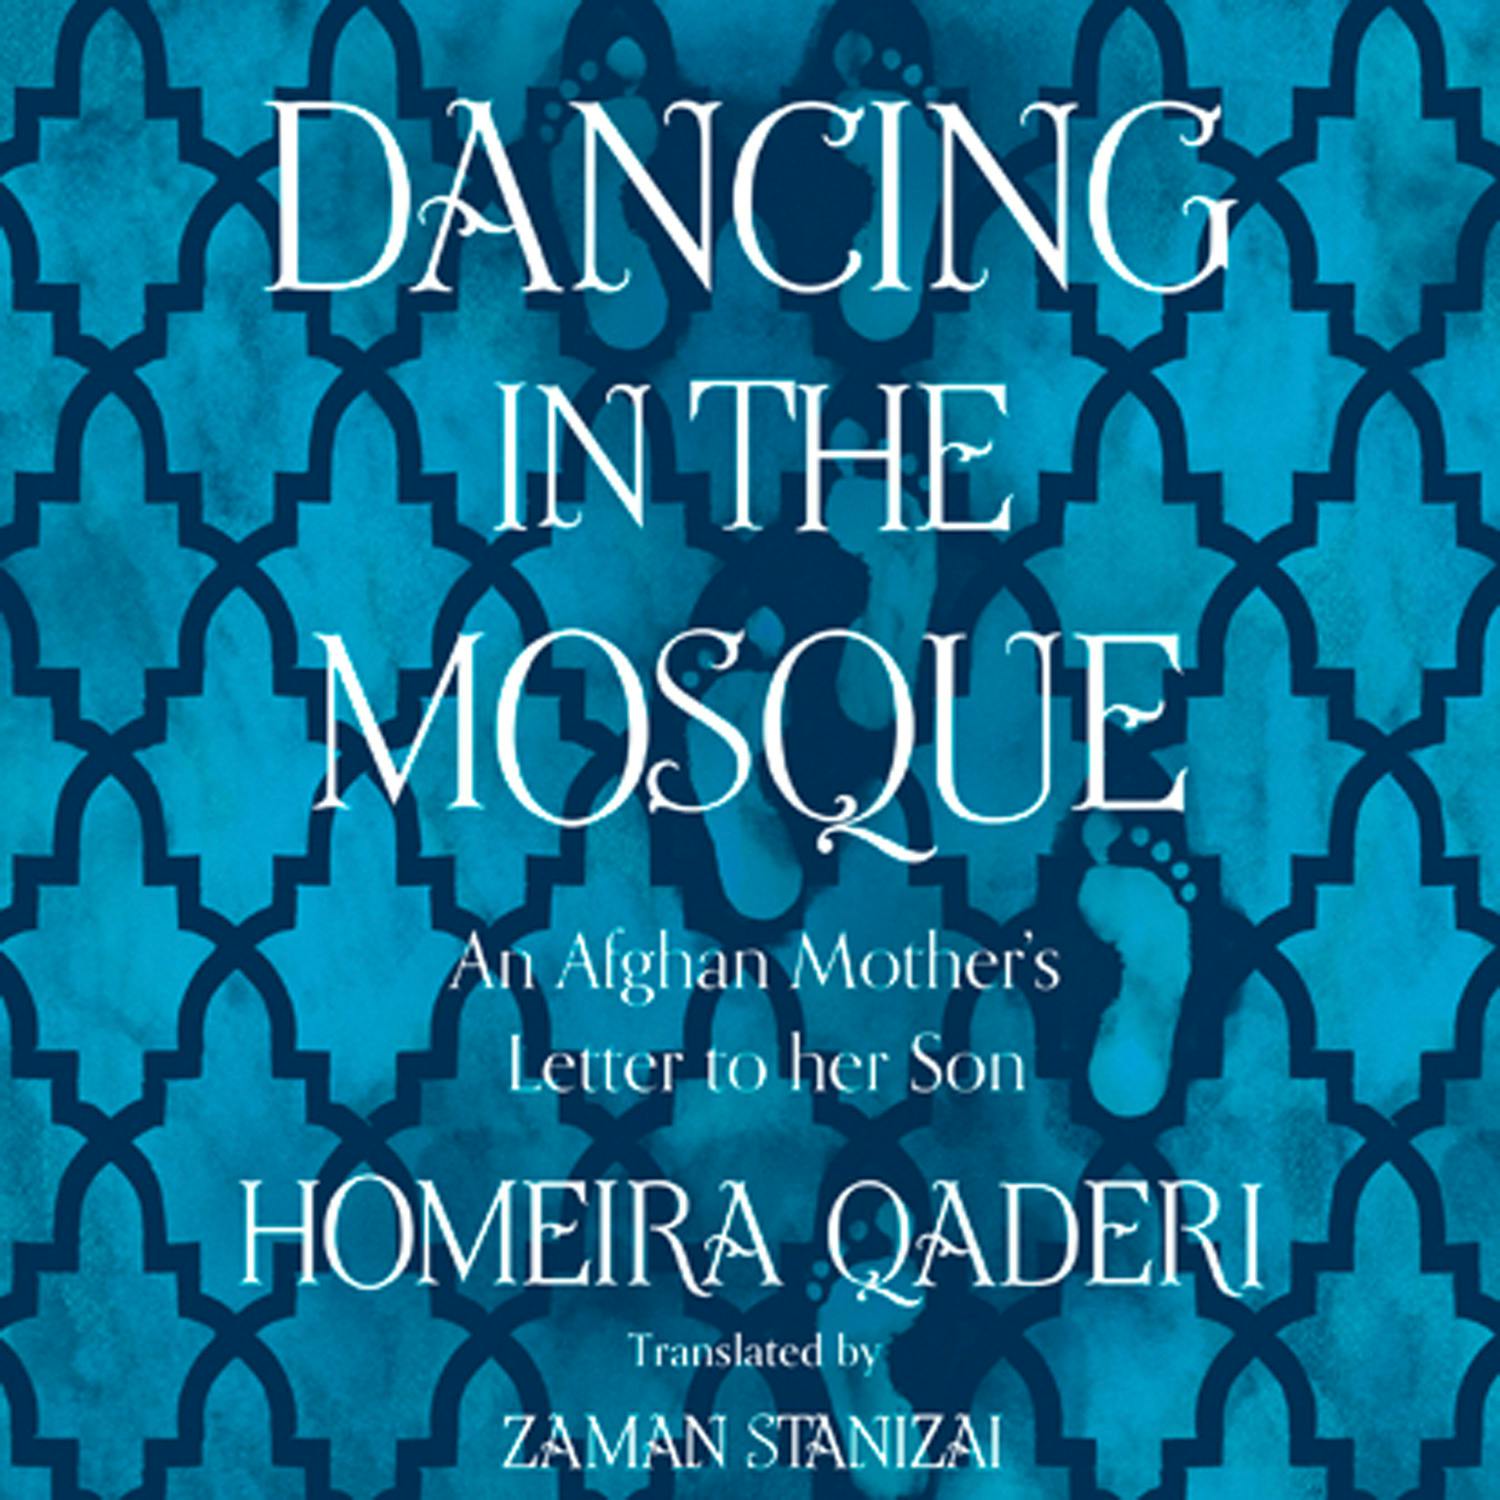 Dancing in the Mosque: An Afghan Mother’s Letter to her Son - Homeira Qaderi